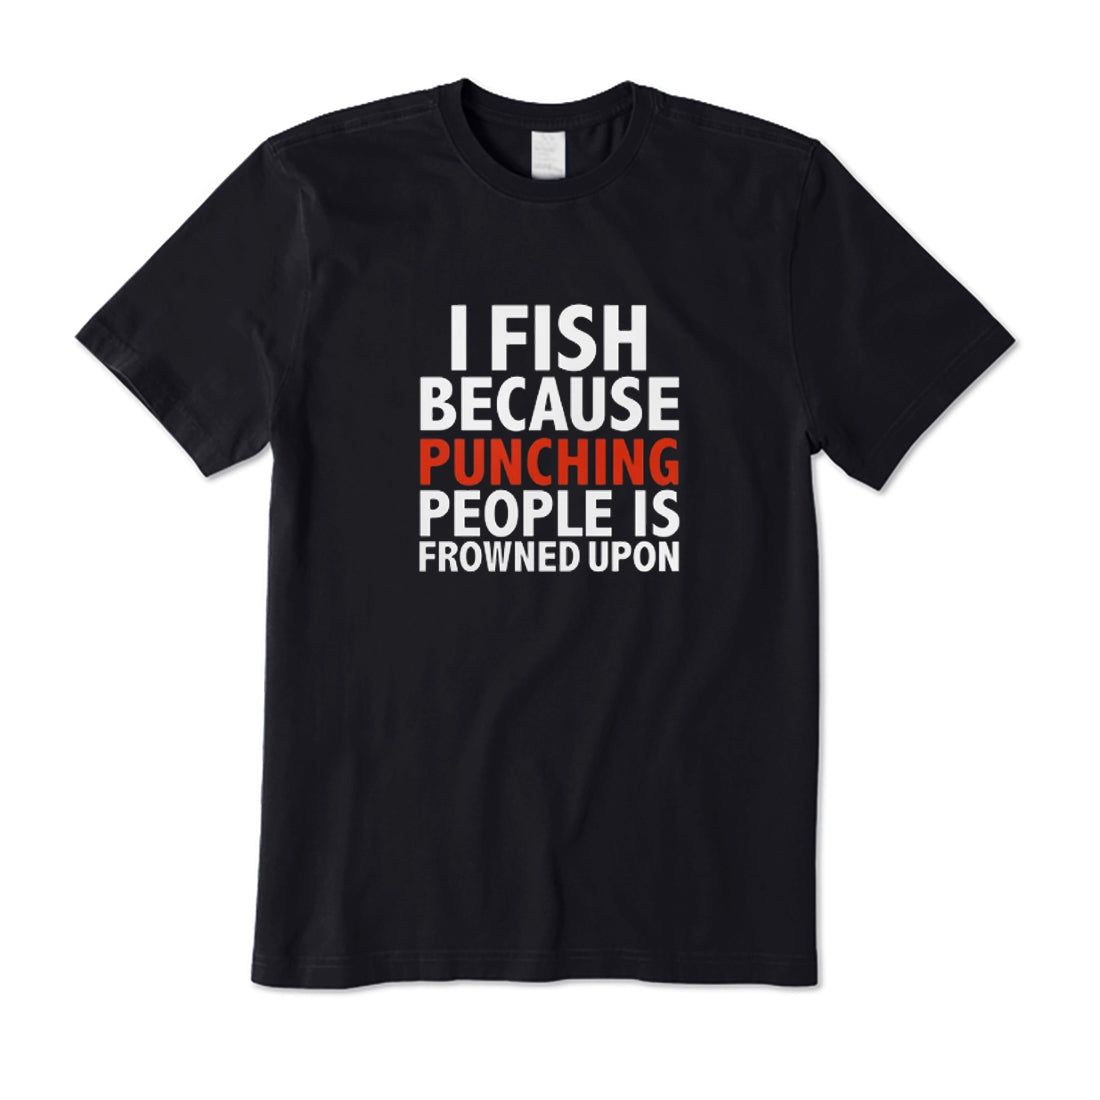 I fish because punching people is frowned upon T-Shirt